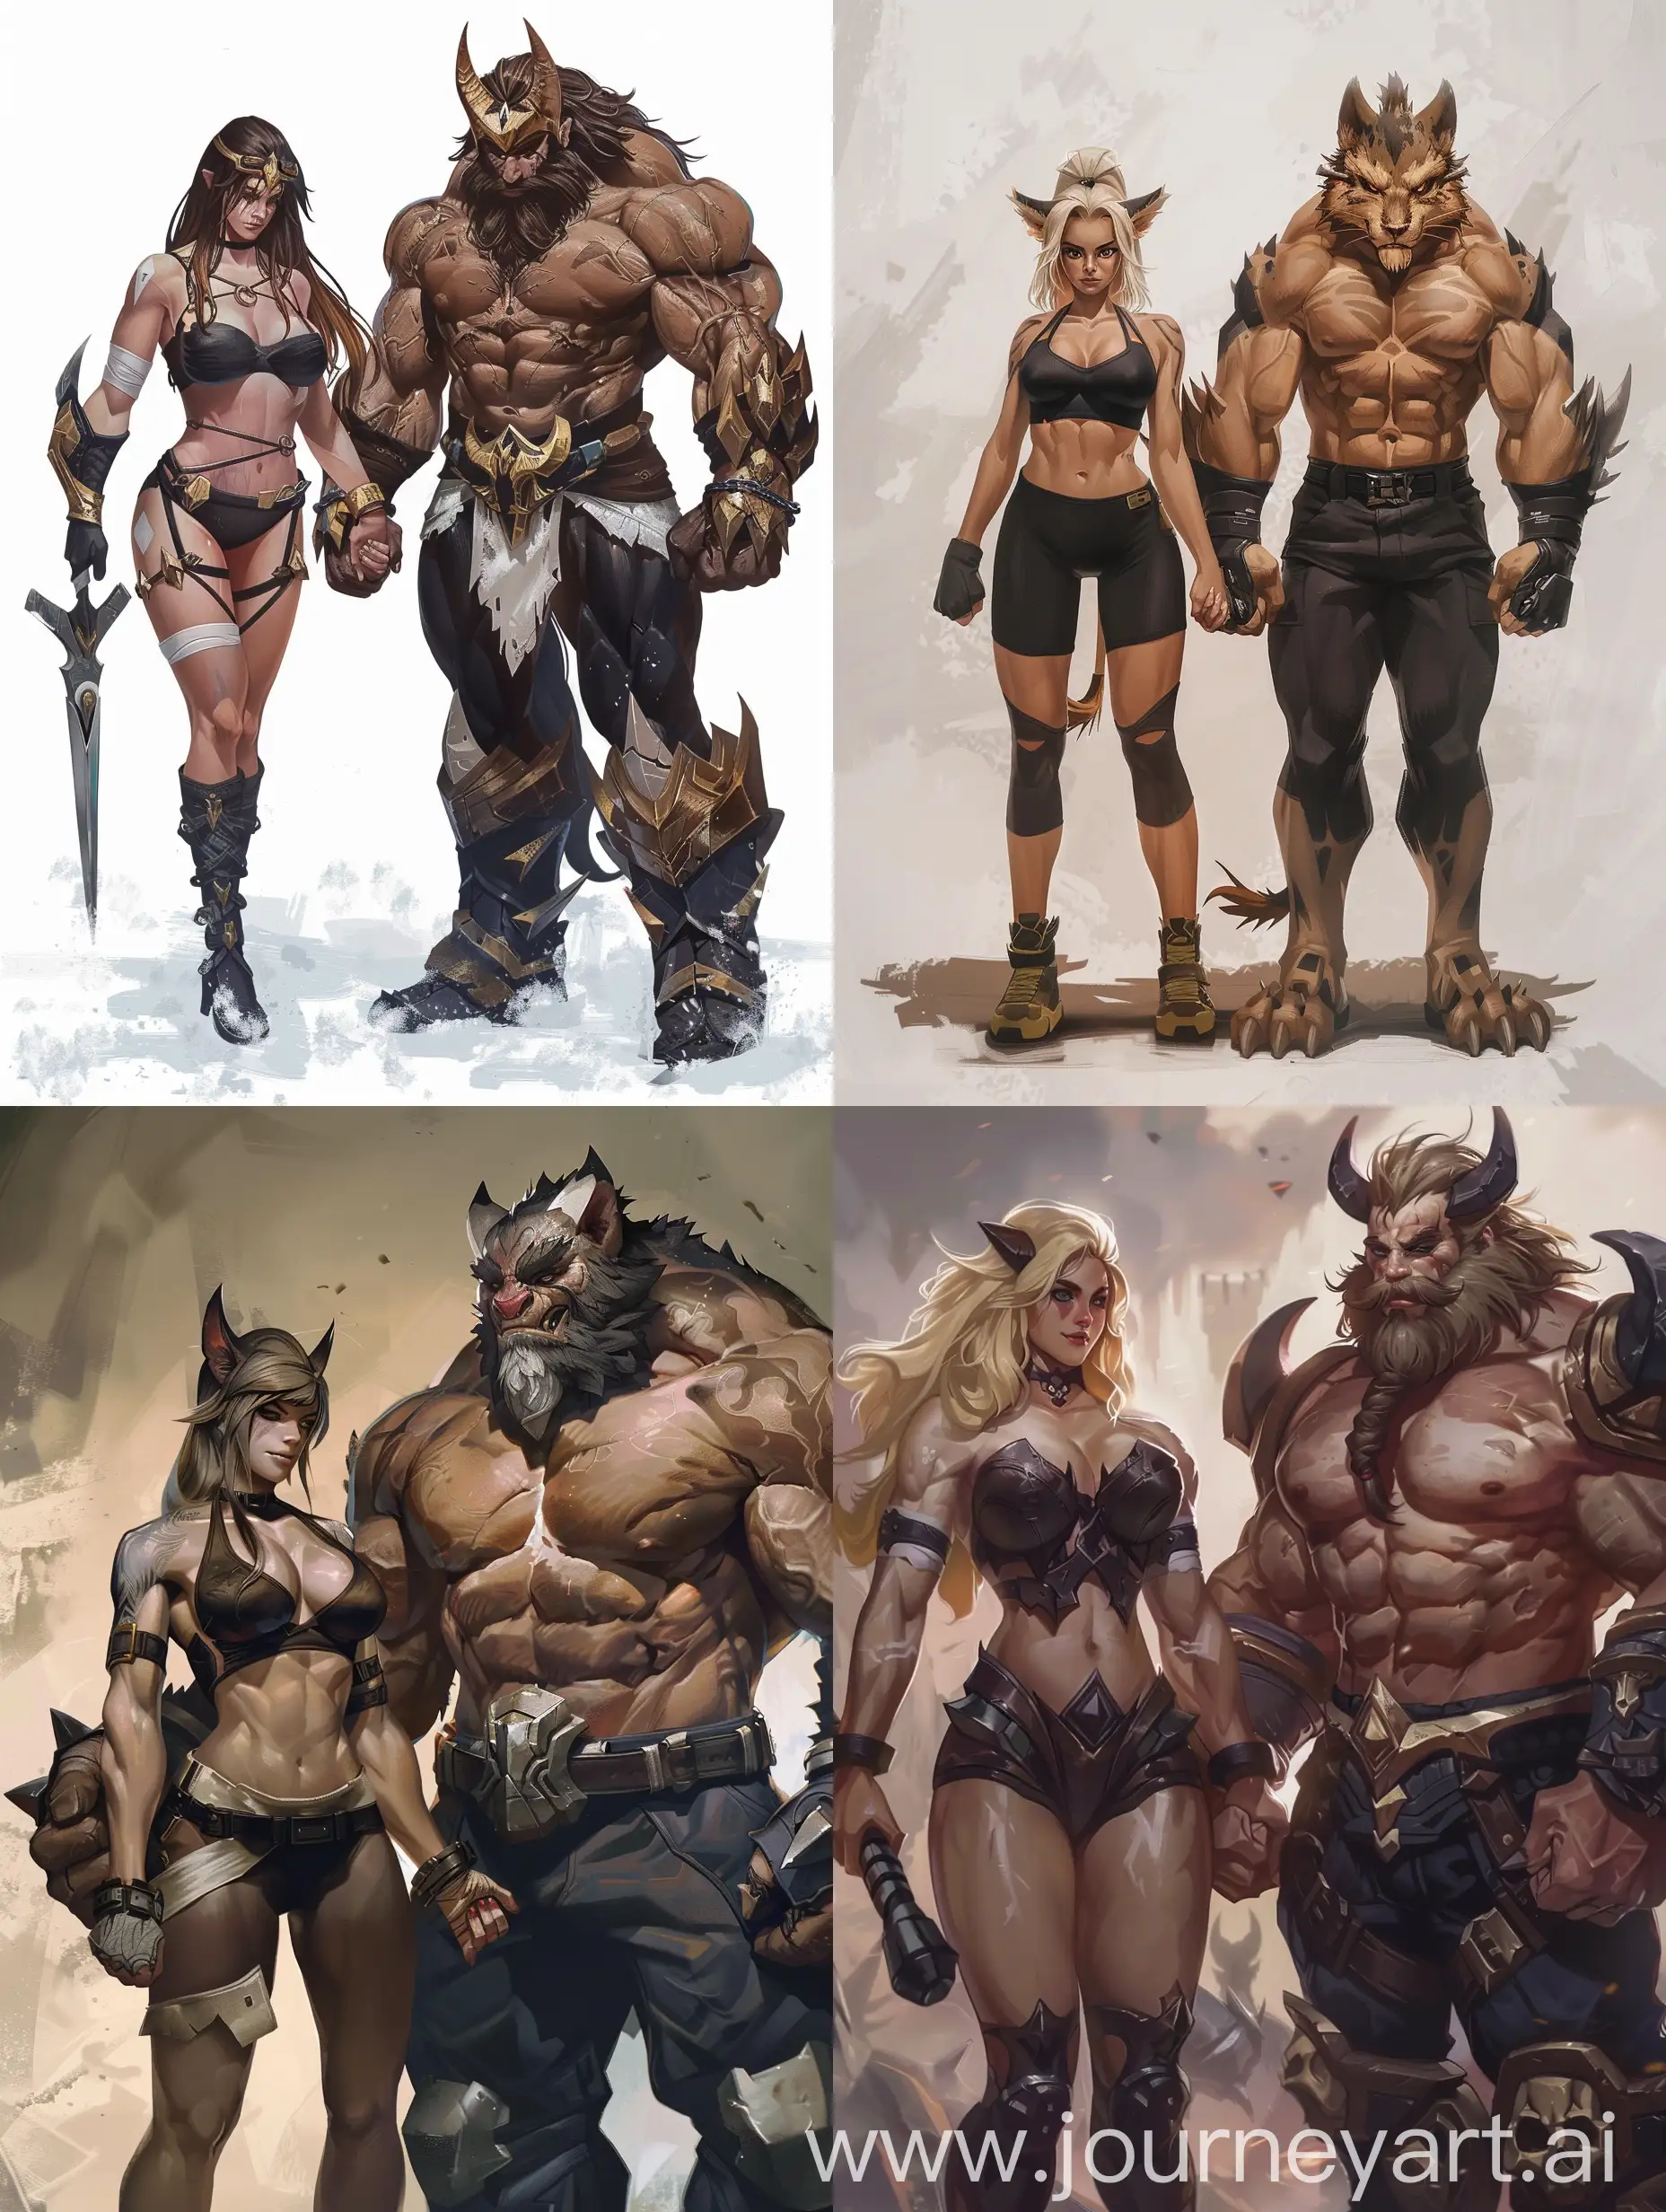 Dynamic-Aesthetic-Bodybuilders-Couple-Holding-Hands-in-League-of-Legends-Style